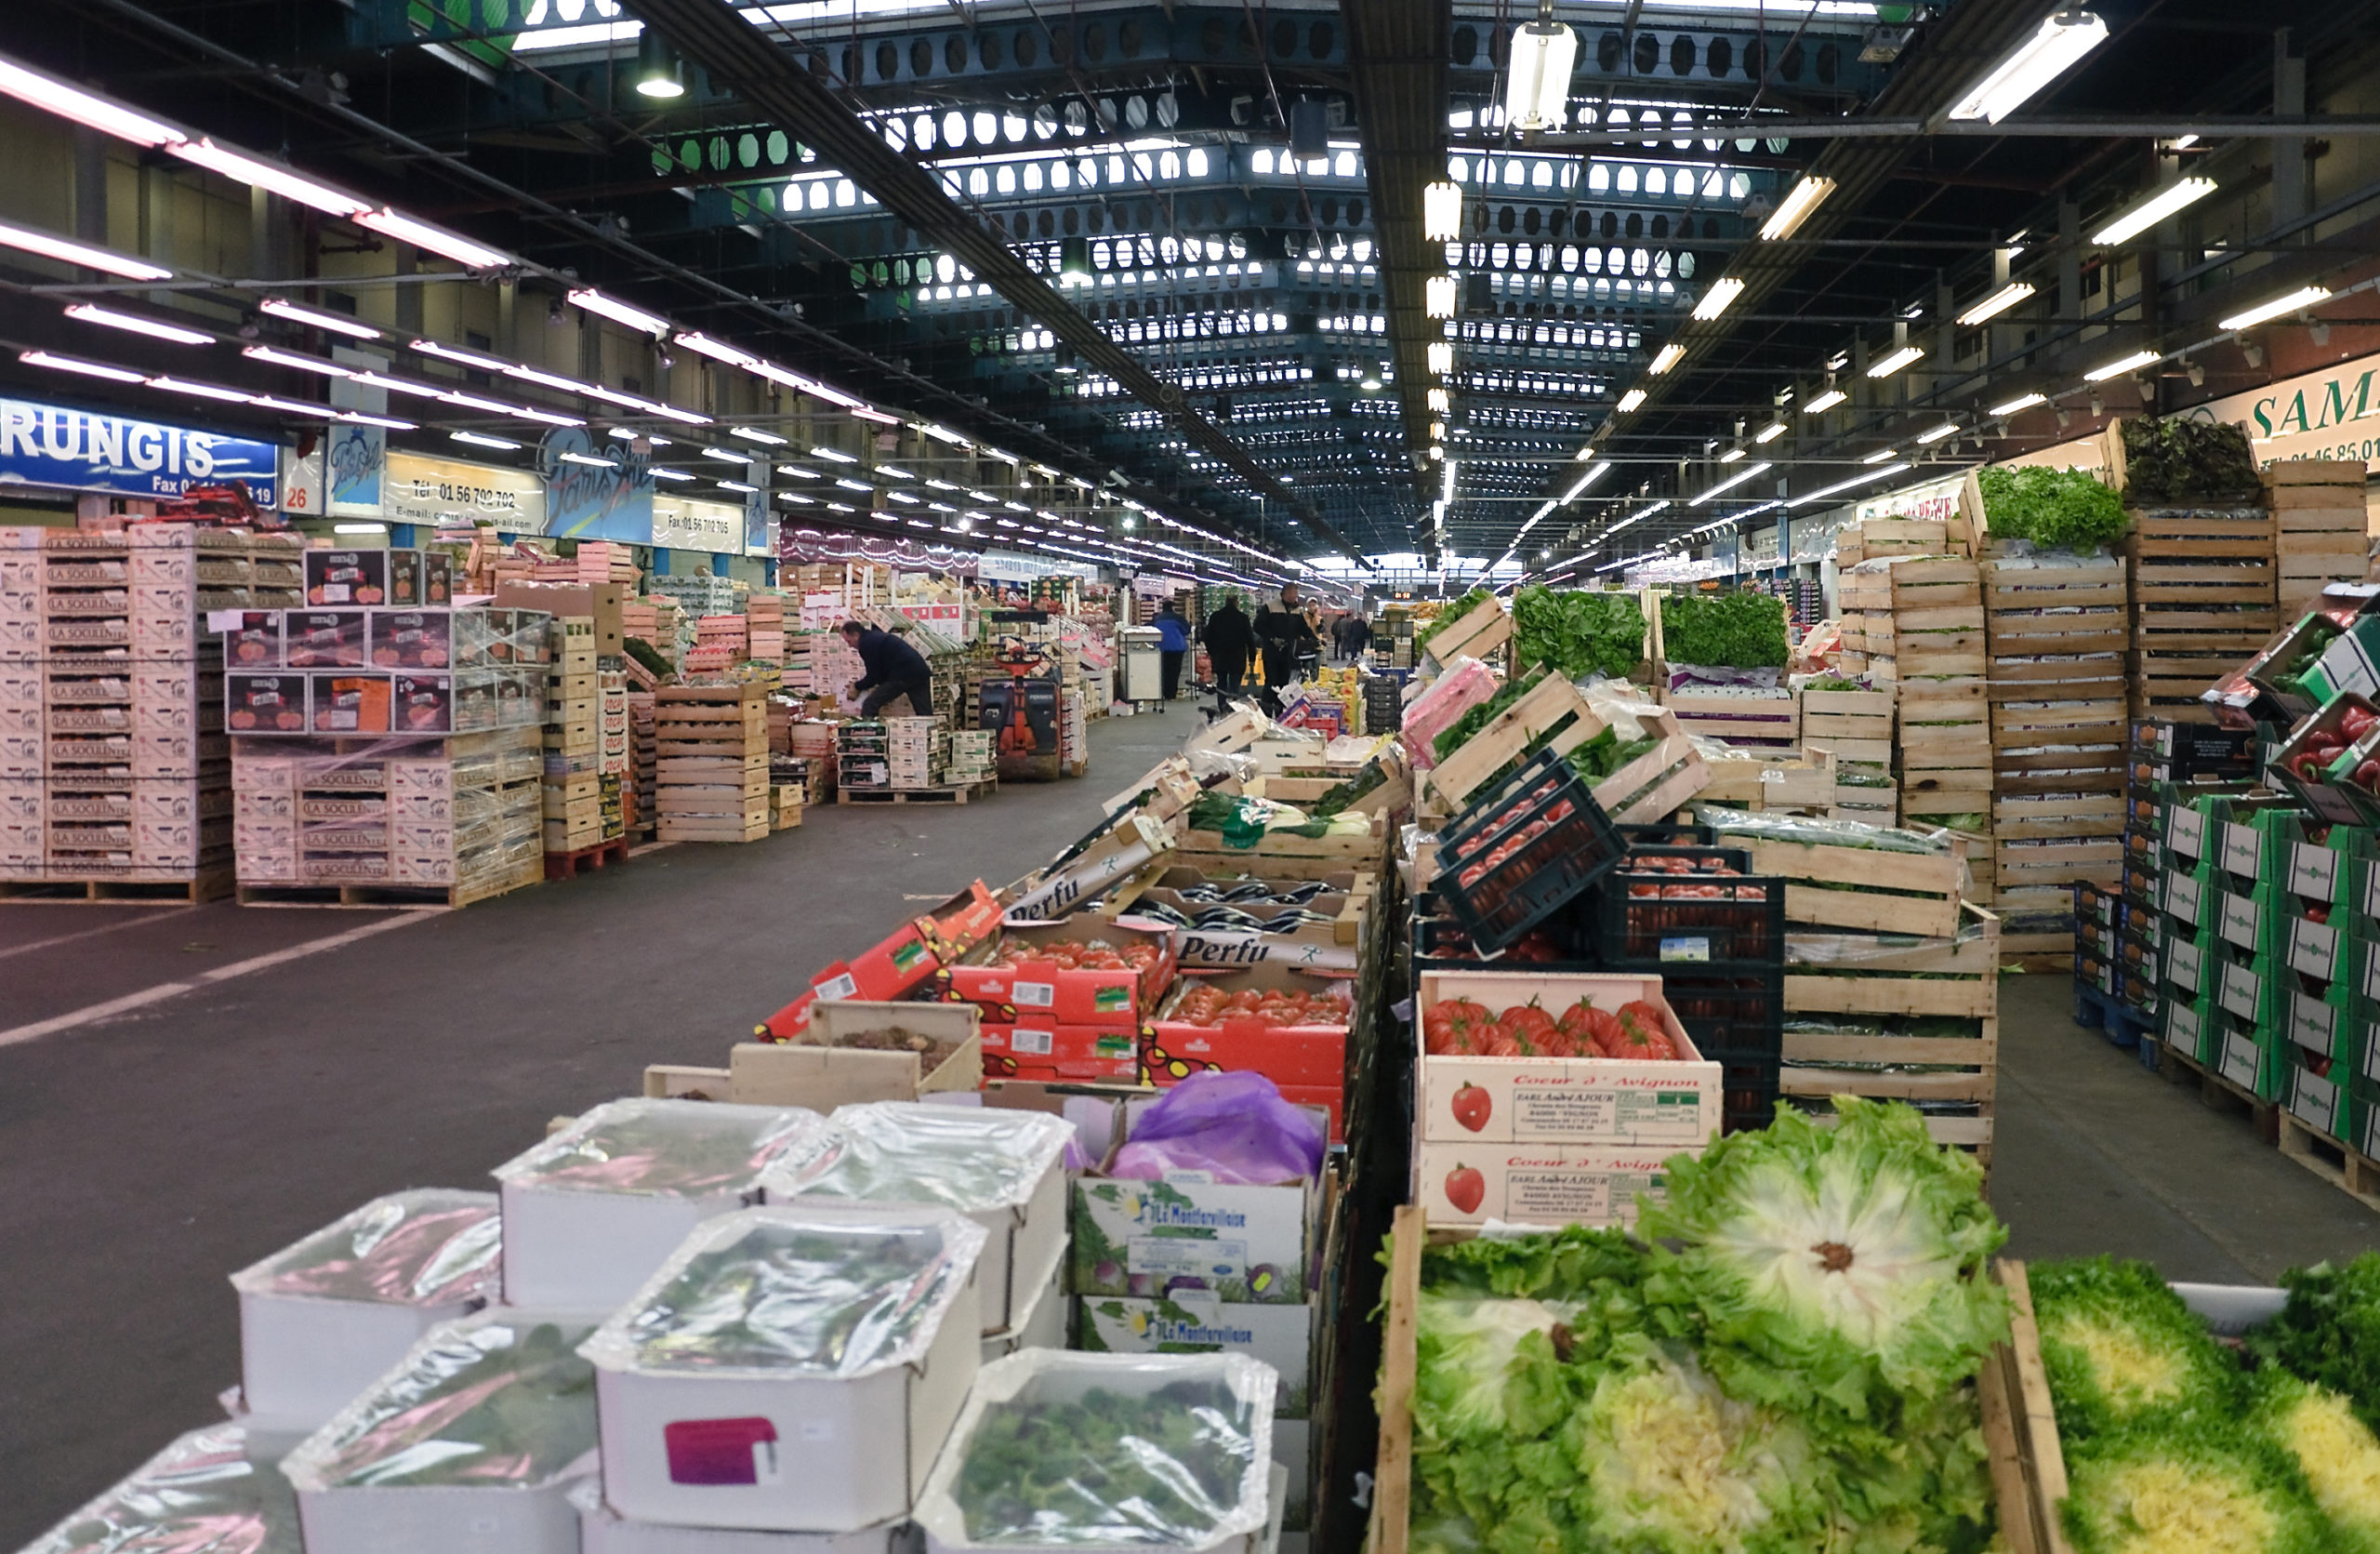 wholesale market worker’s Sarcastic take on Brexit raising food costs is priceless!